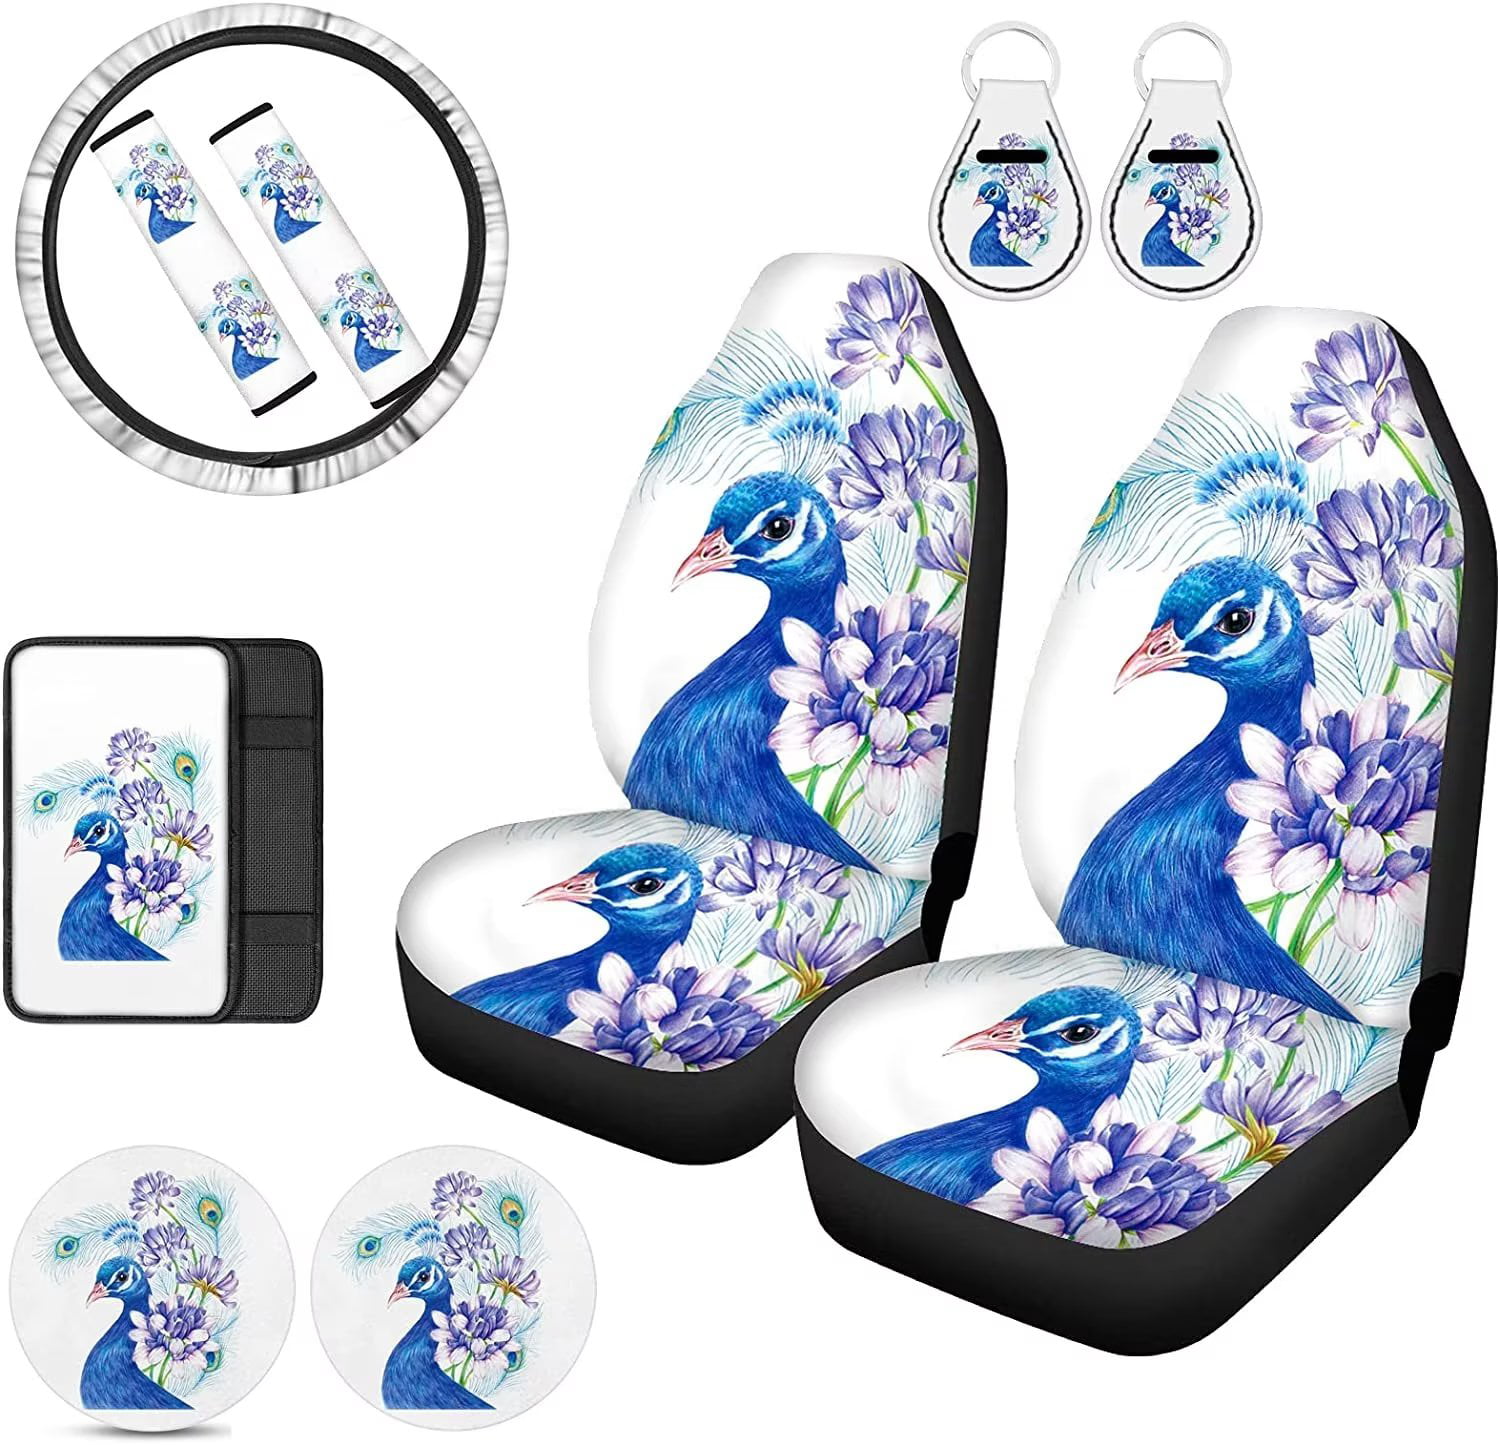 Pzuqiu Girly Butterfly Car Accessories for Women Front Back Seat Covers  Full Set with Universal Steering Wheel Covers,Seat Belt Cover,Auto Cup